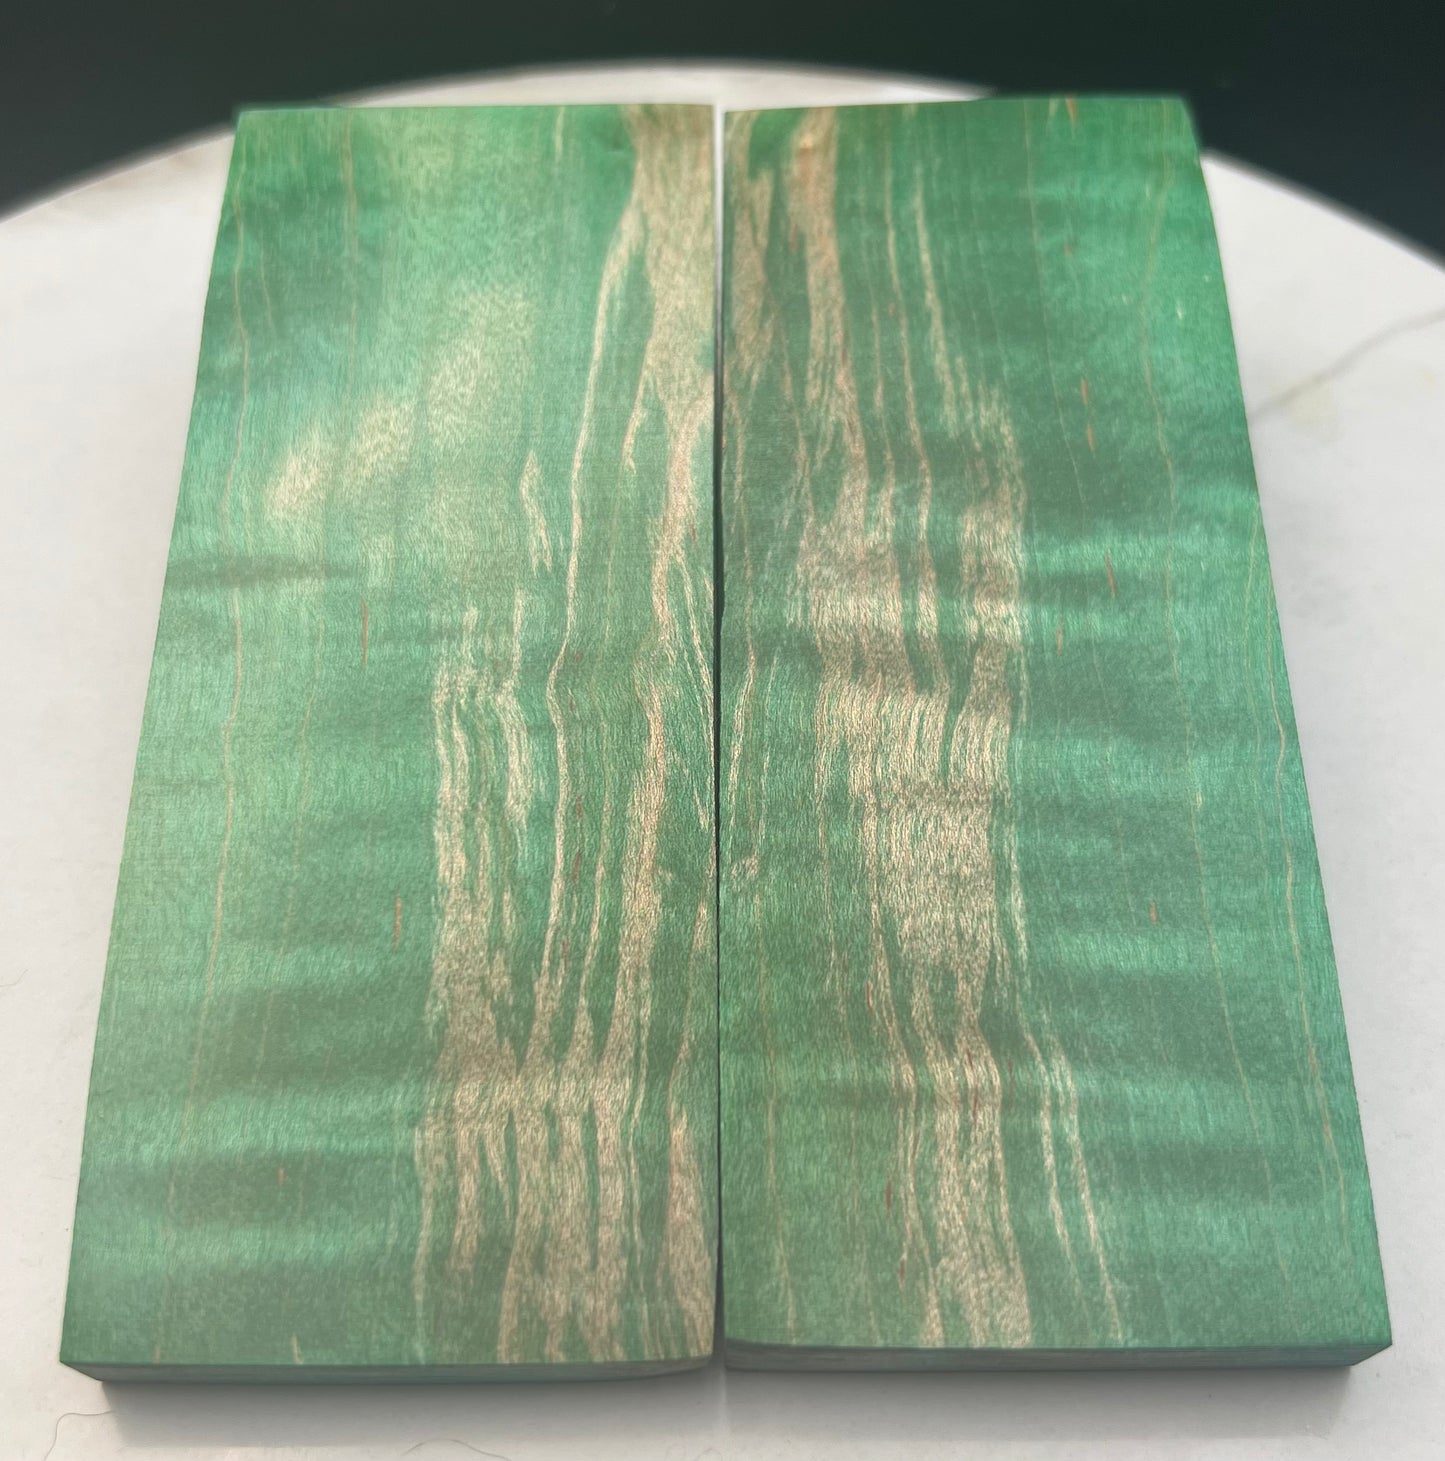 Stabilized Curly Maple knife Scales Emerald Green